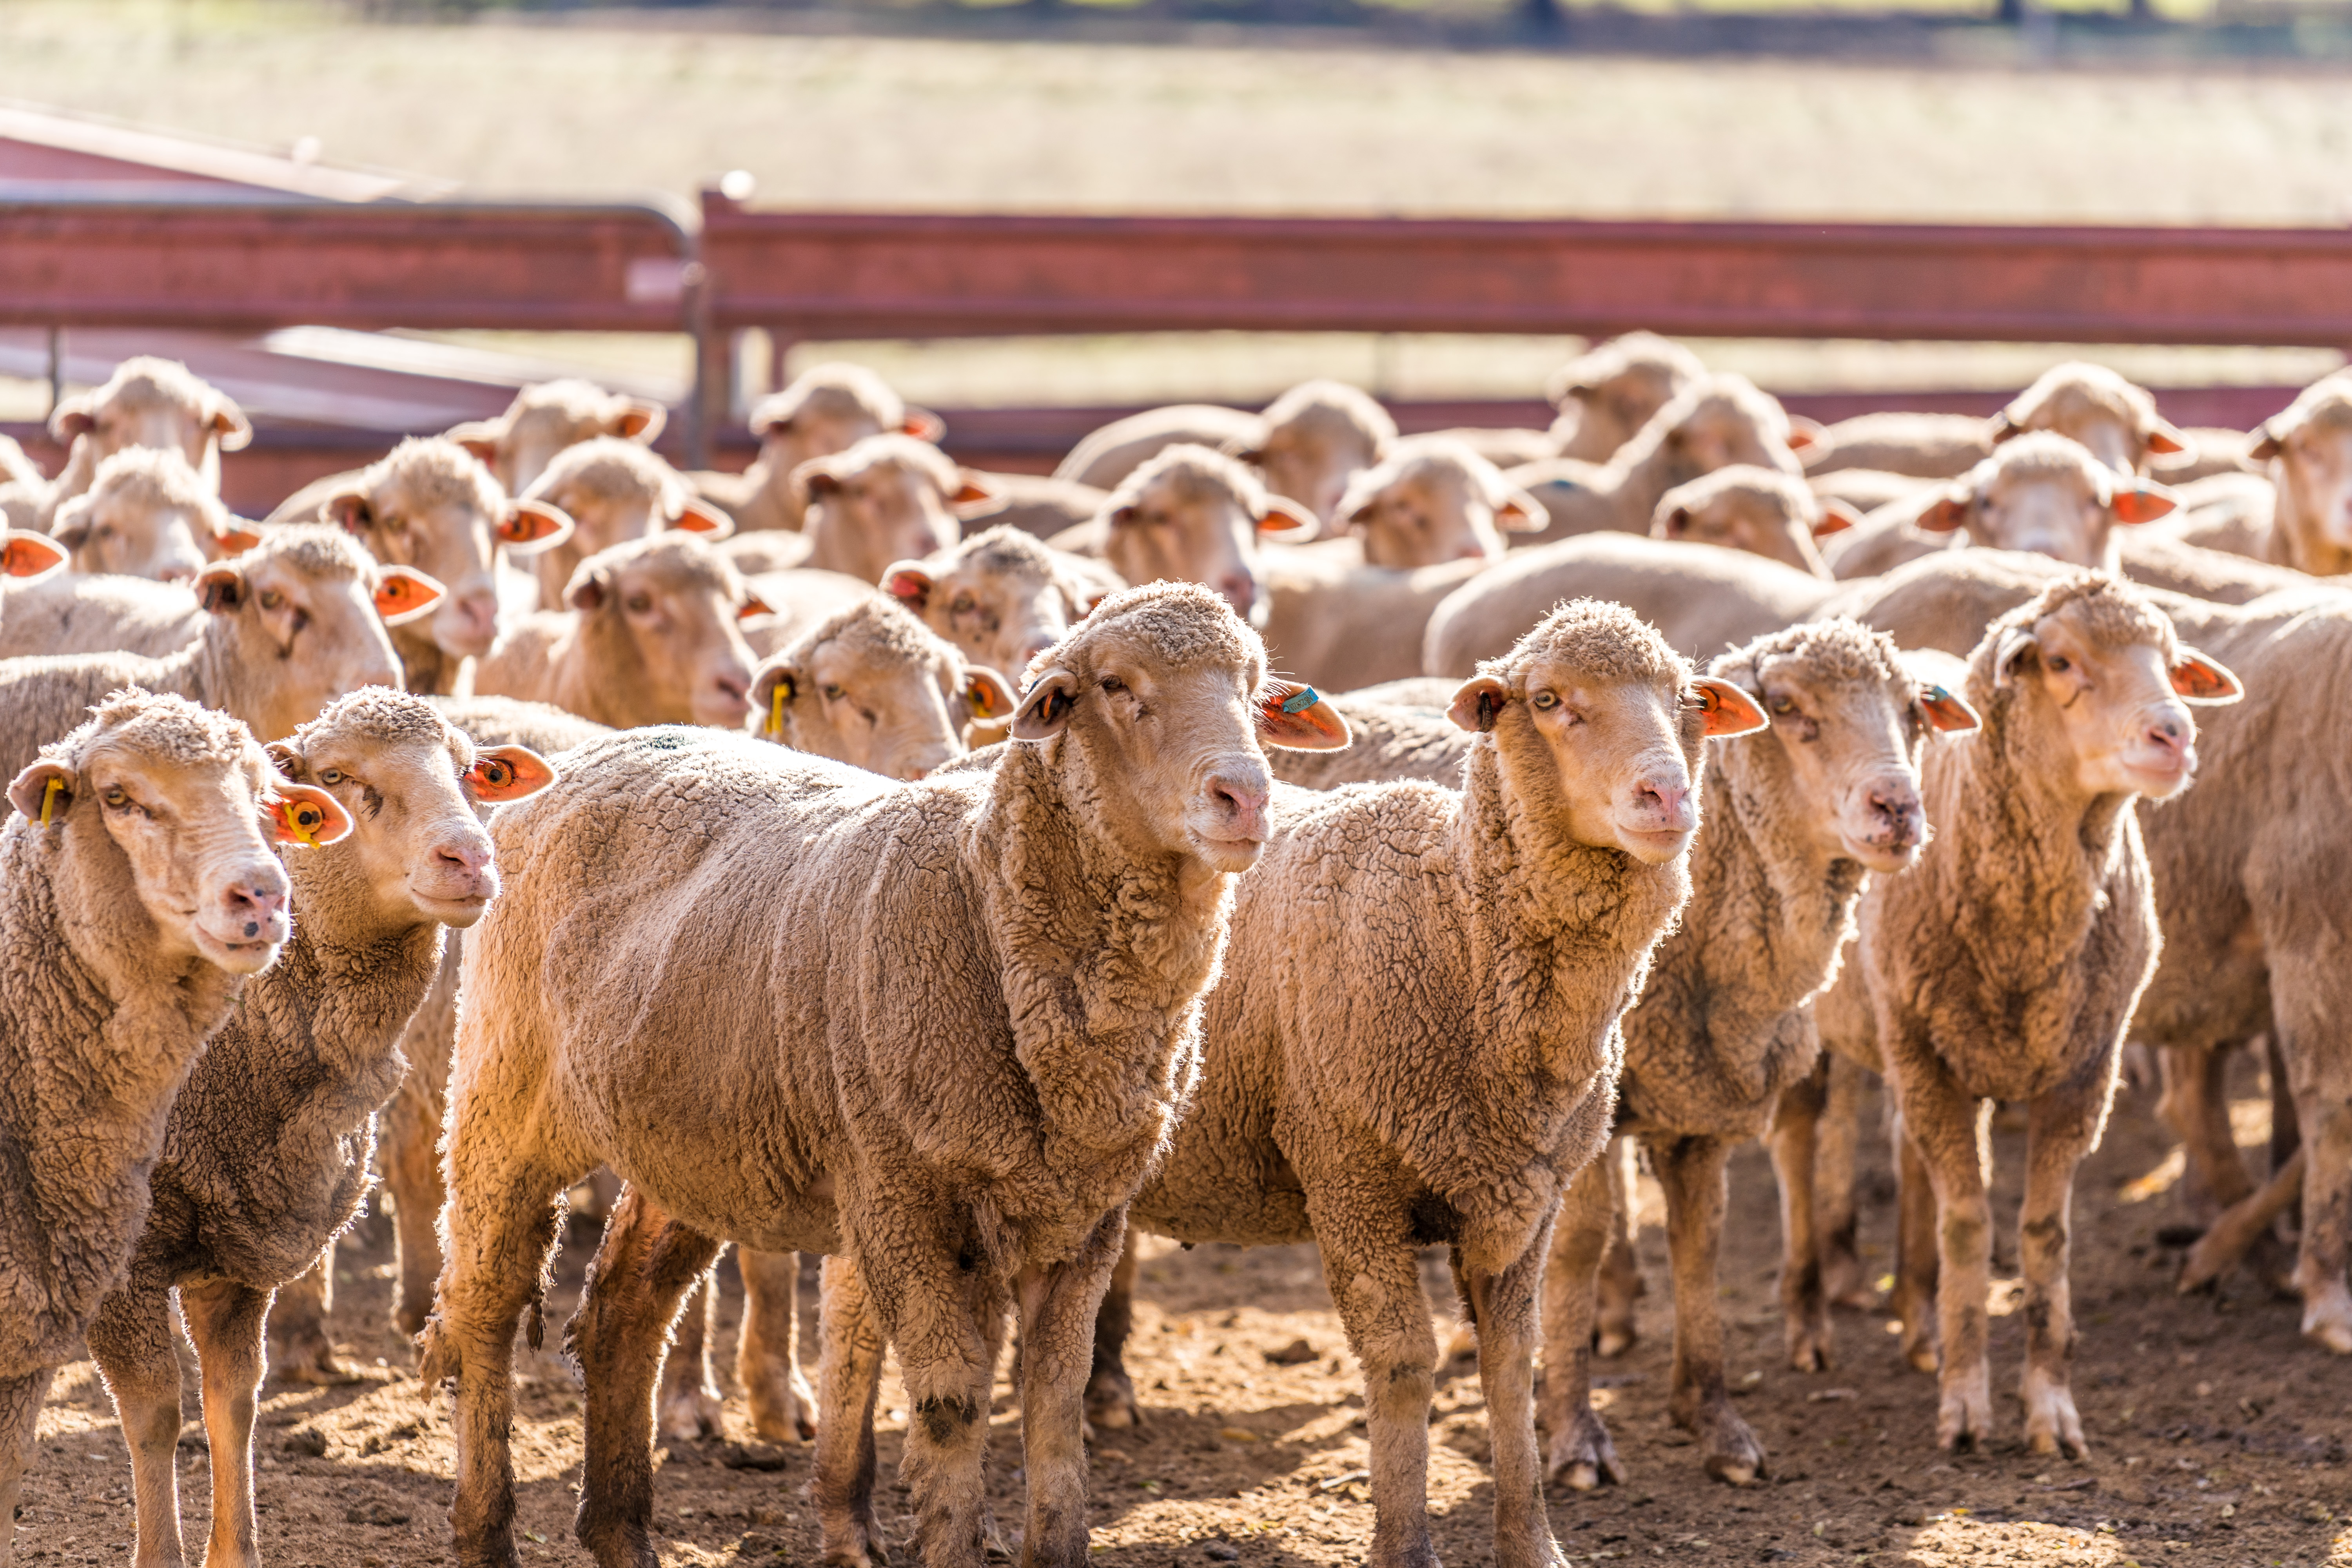 Sheep at the Cowra Agricultural Research & Advisory Station